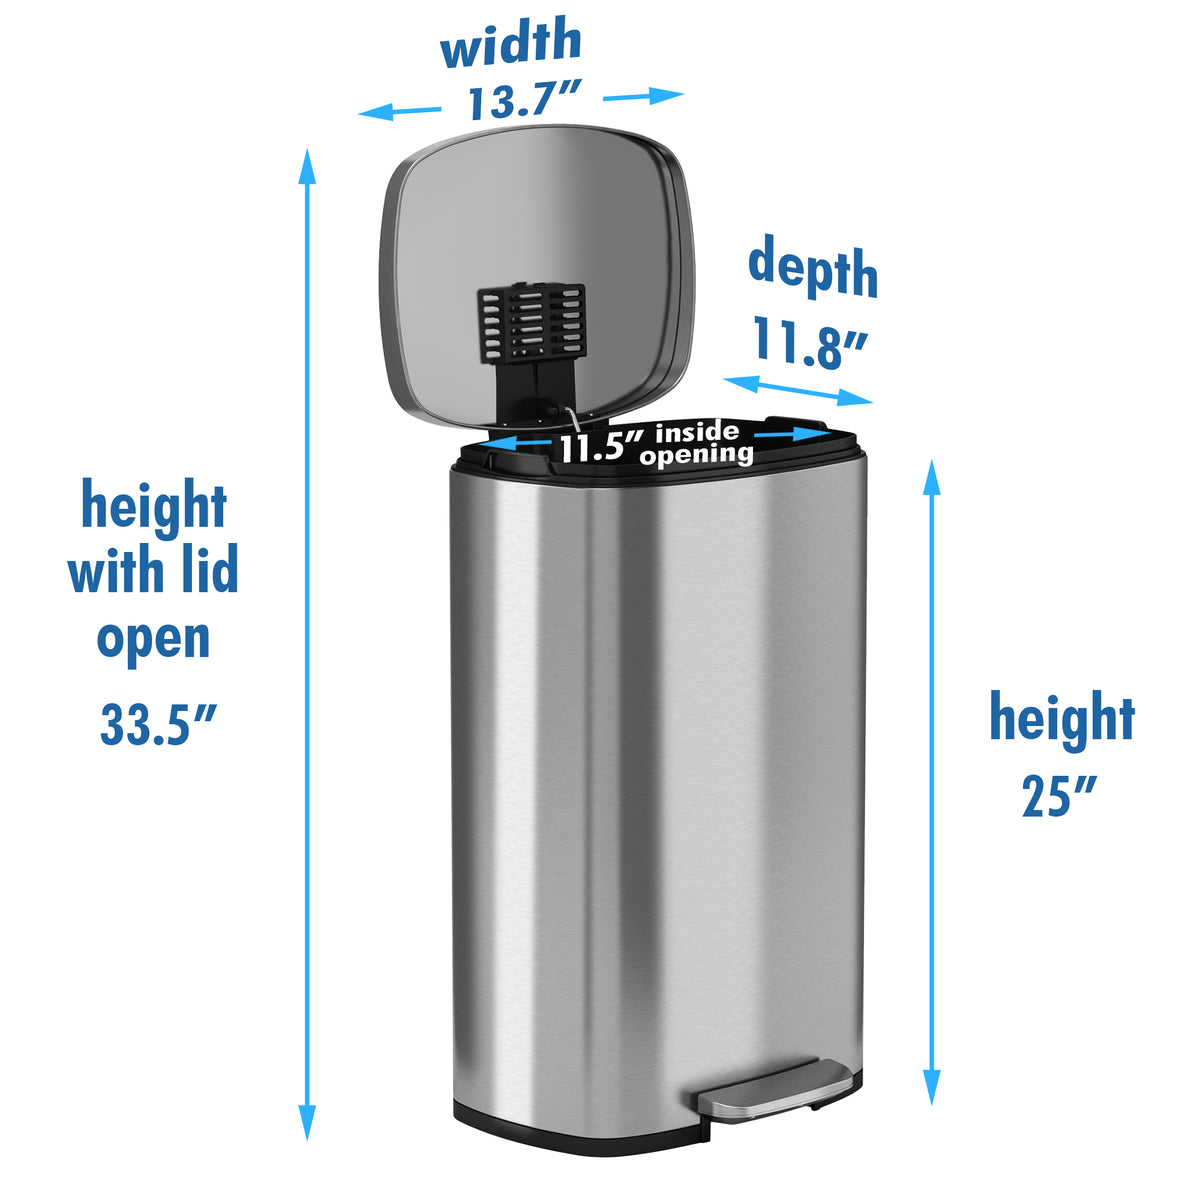 8 Gallon / 30 Liter SoftStep Step Pedal Trash Can dimensions